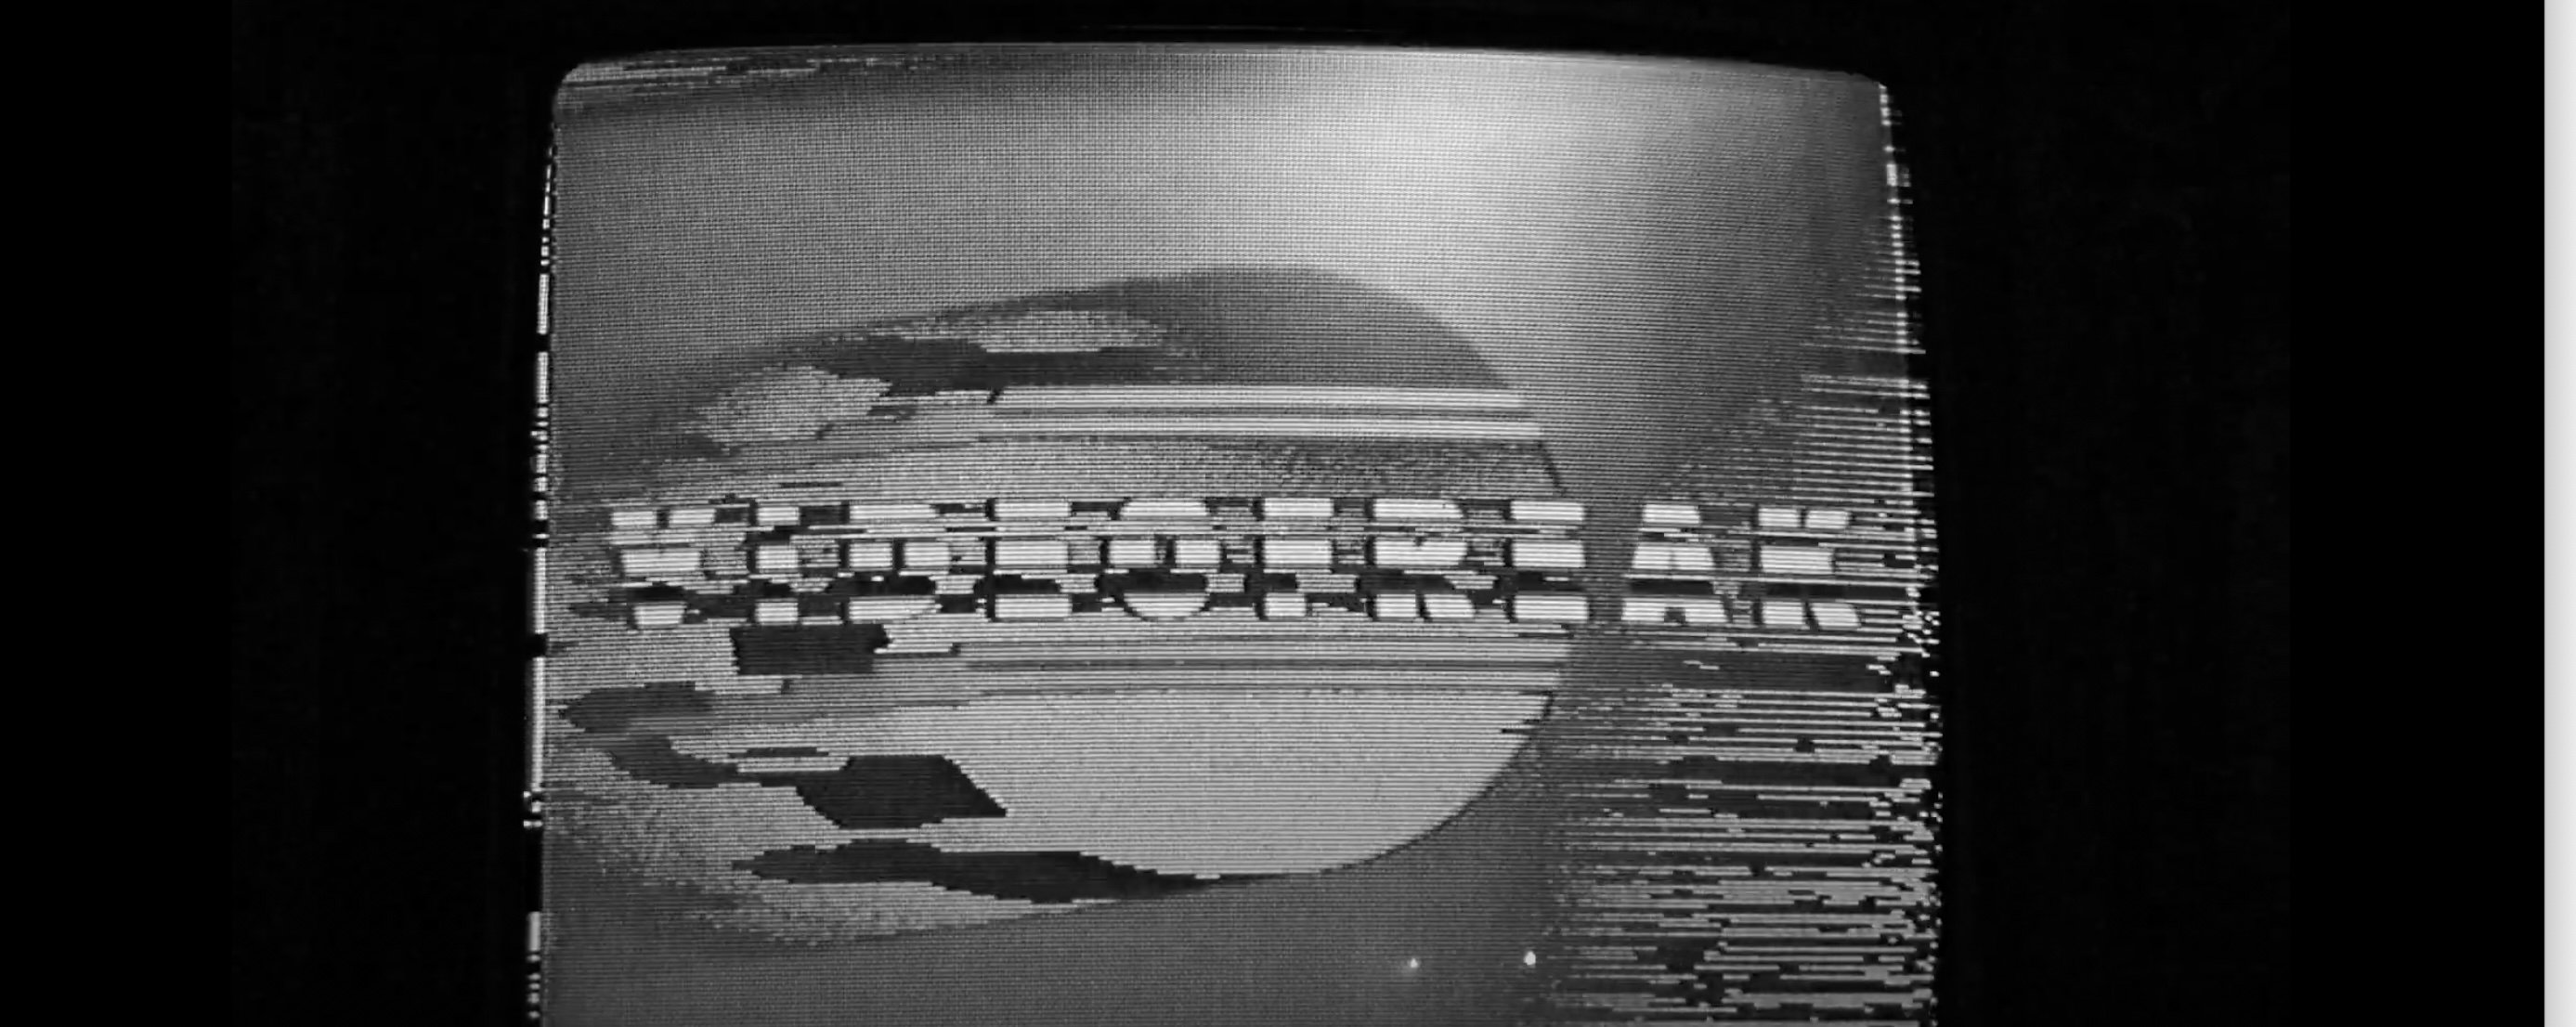 A black and white television screen scrambled by tracking issues, with the words VIDEOFREAK obscured by wavy lines